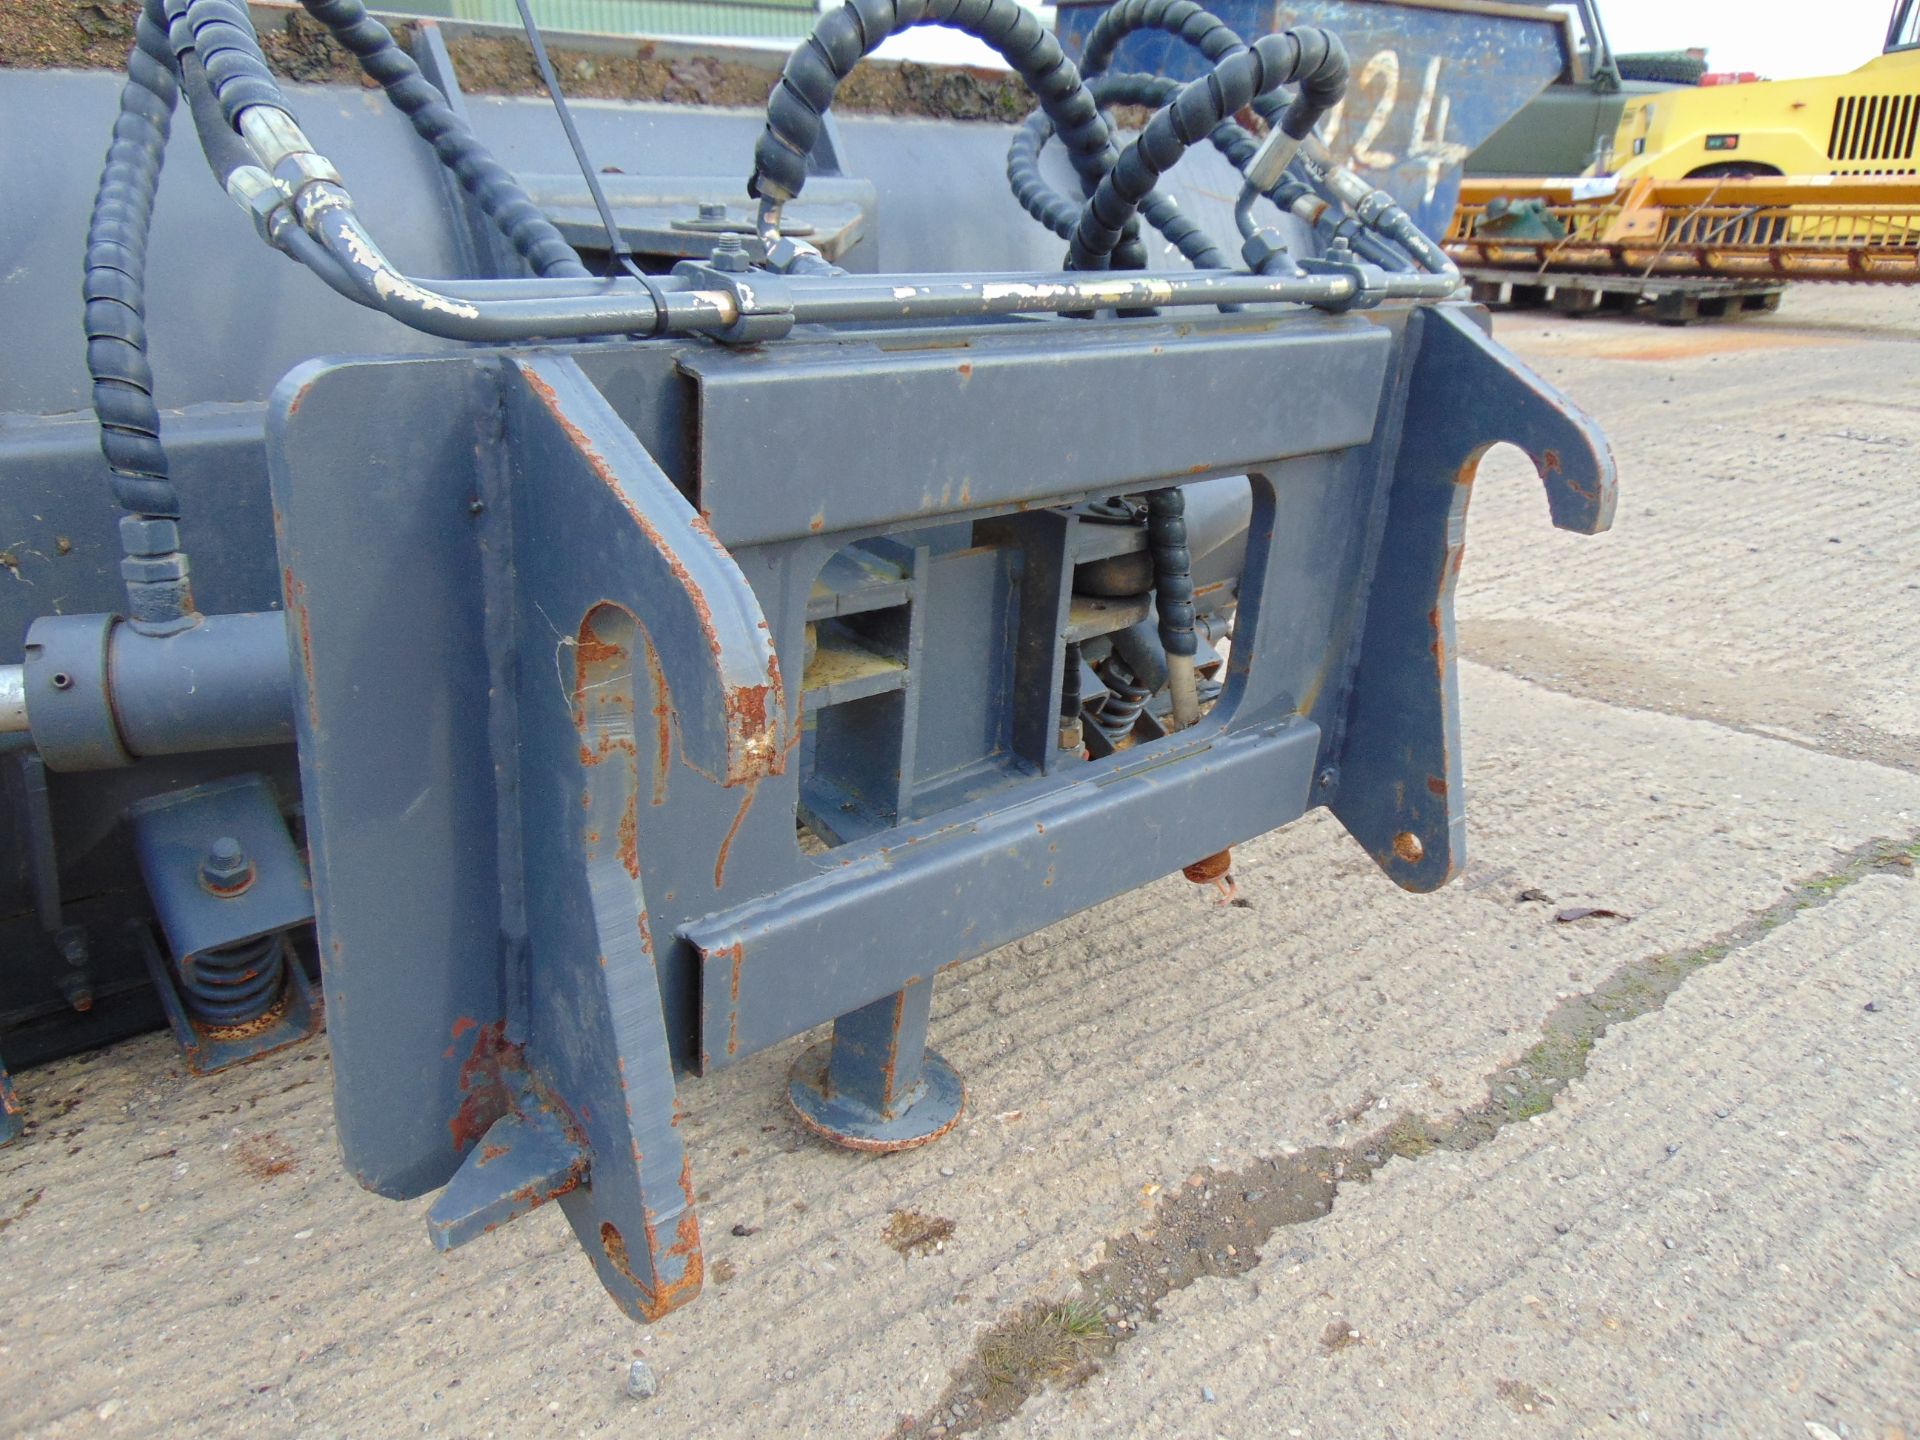 6' Hydraulic Snow Plough Blade for Telehandler, Forklift, Tractor Etc - Image 7 of 7